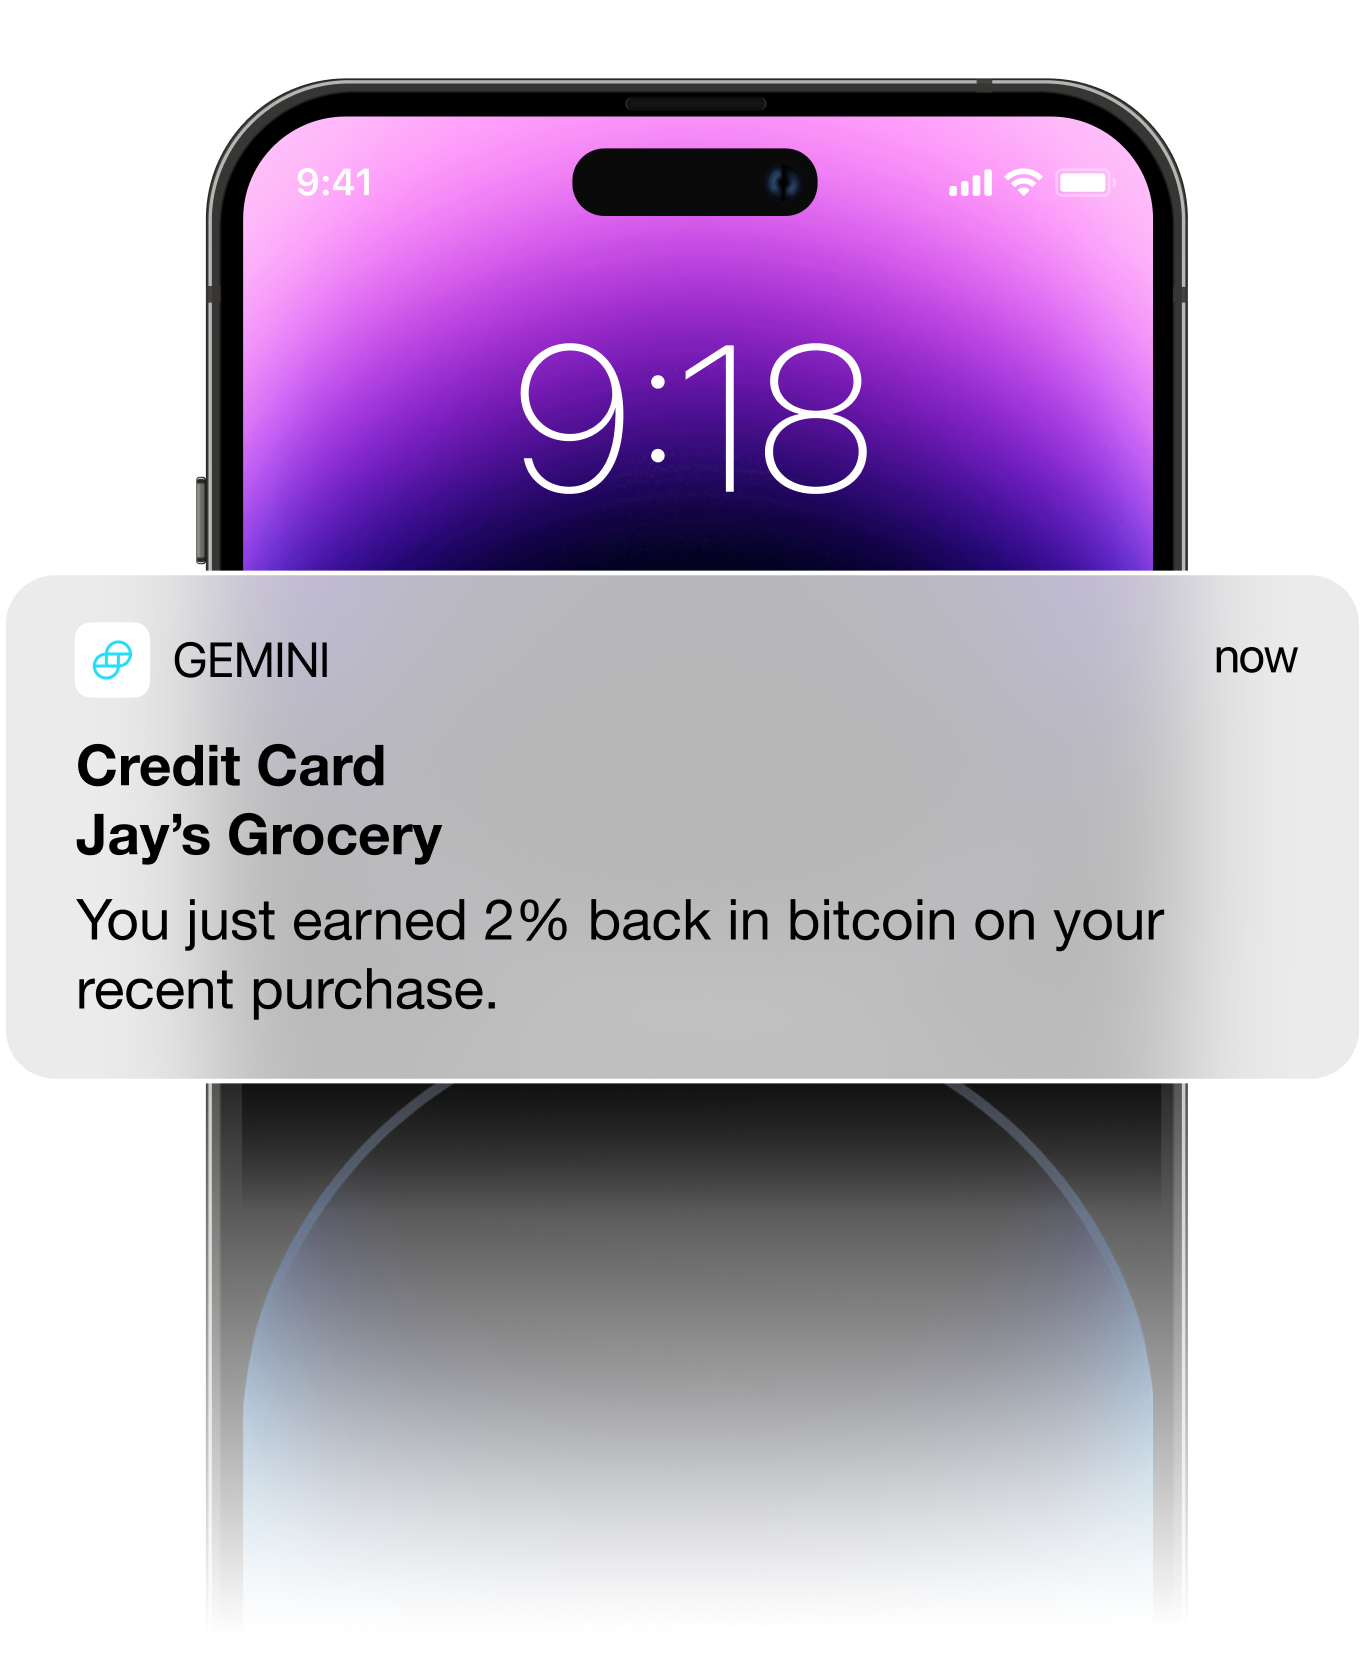 Picture of iphone showing a notification of cryptocurrency cash back reward